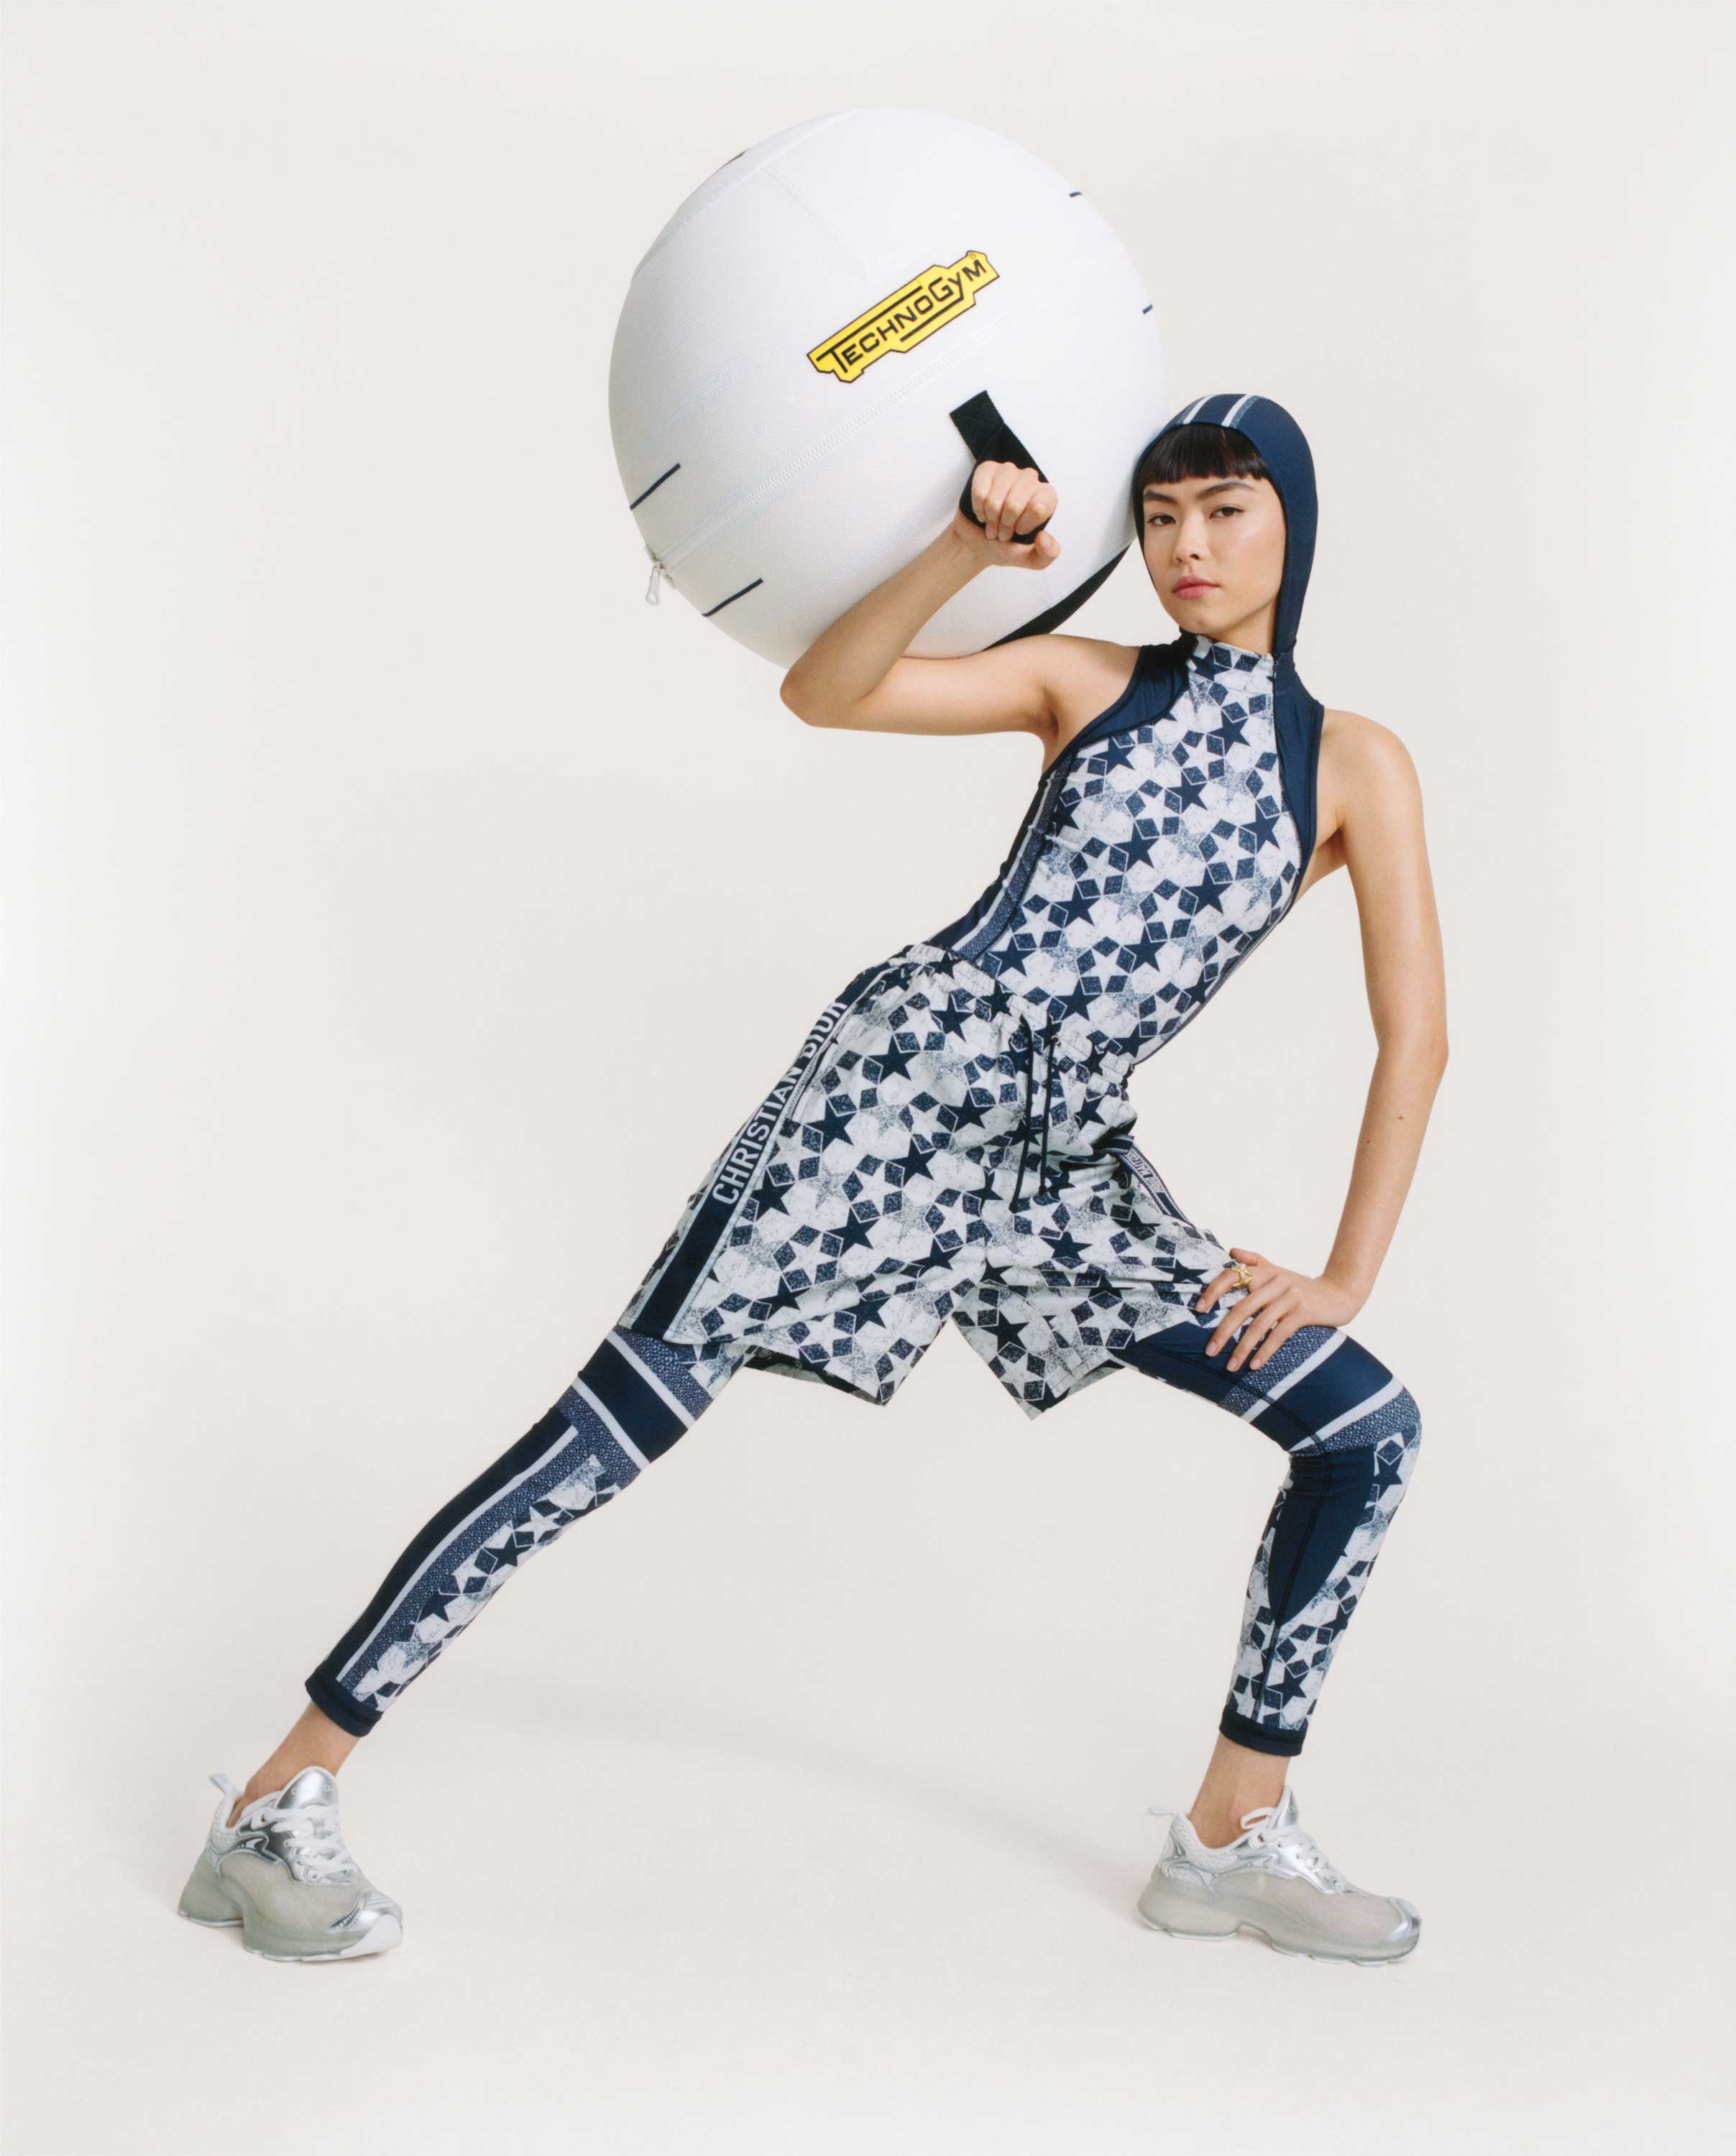 Dior x Technogym launch limited edition fitness collection, STIRpad News